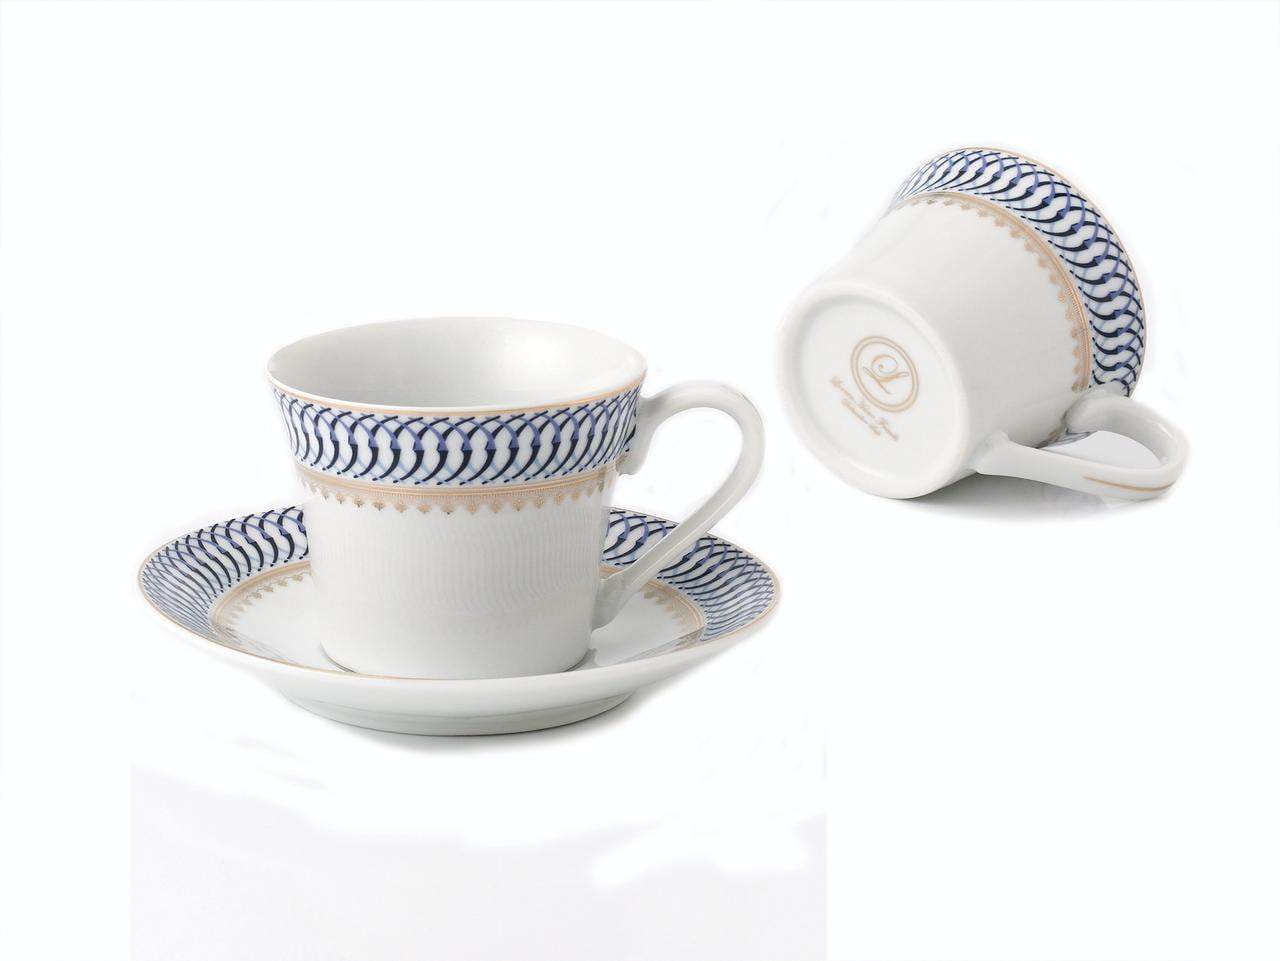 Tikooere Espresso Cups with Saucers Set of 6, Ceramic 4 Ounce Small  Cappuccino Cups for Coffee,Latte…See more Tikooere Espresso Cups with  Saucers Set